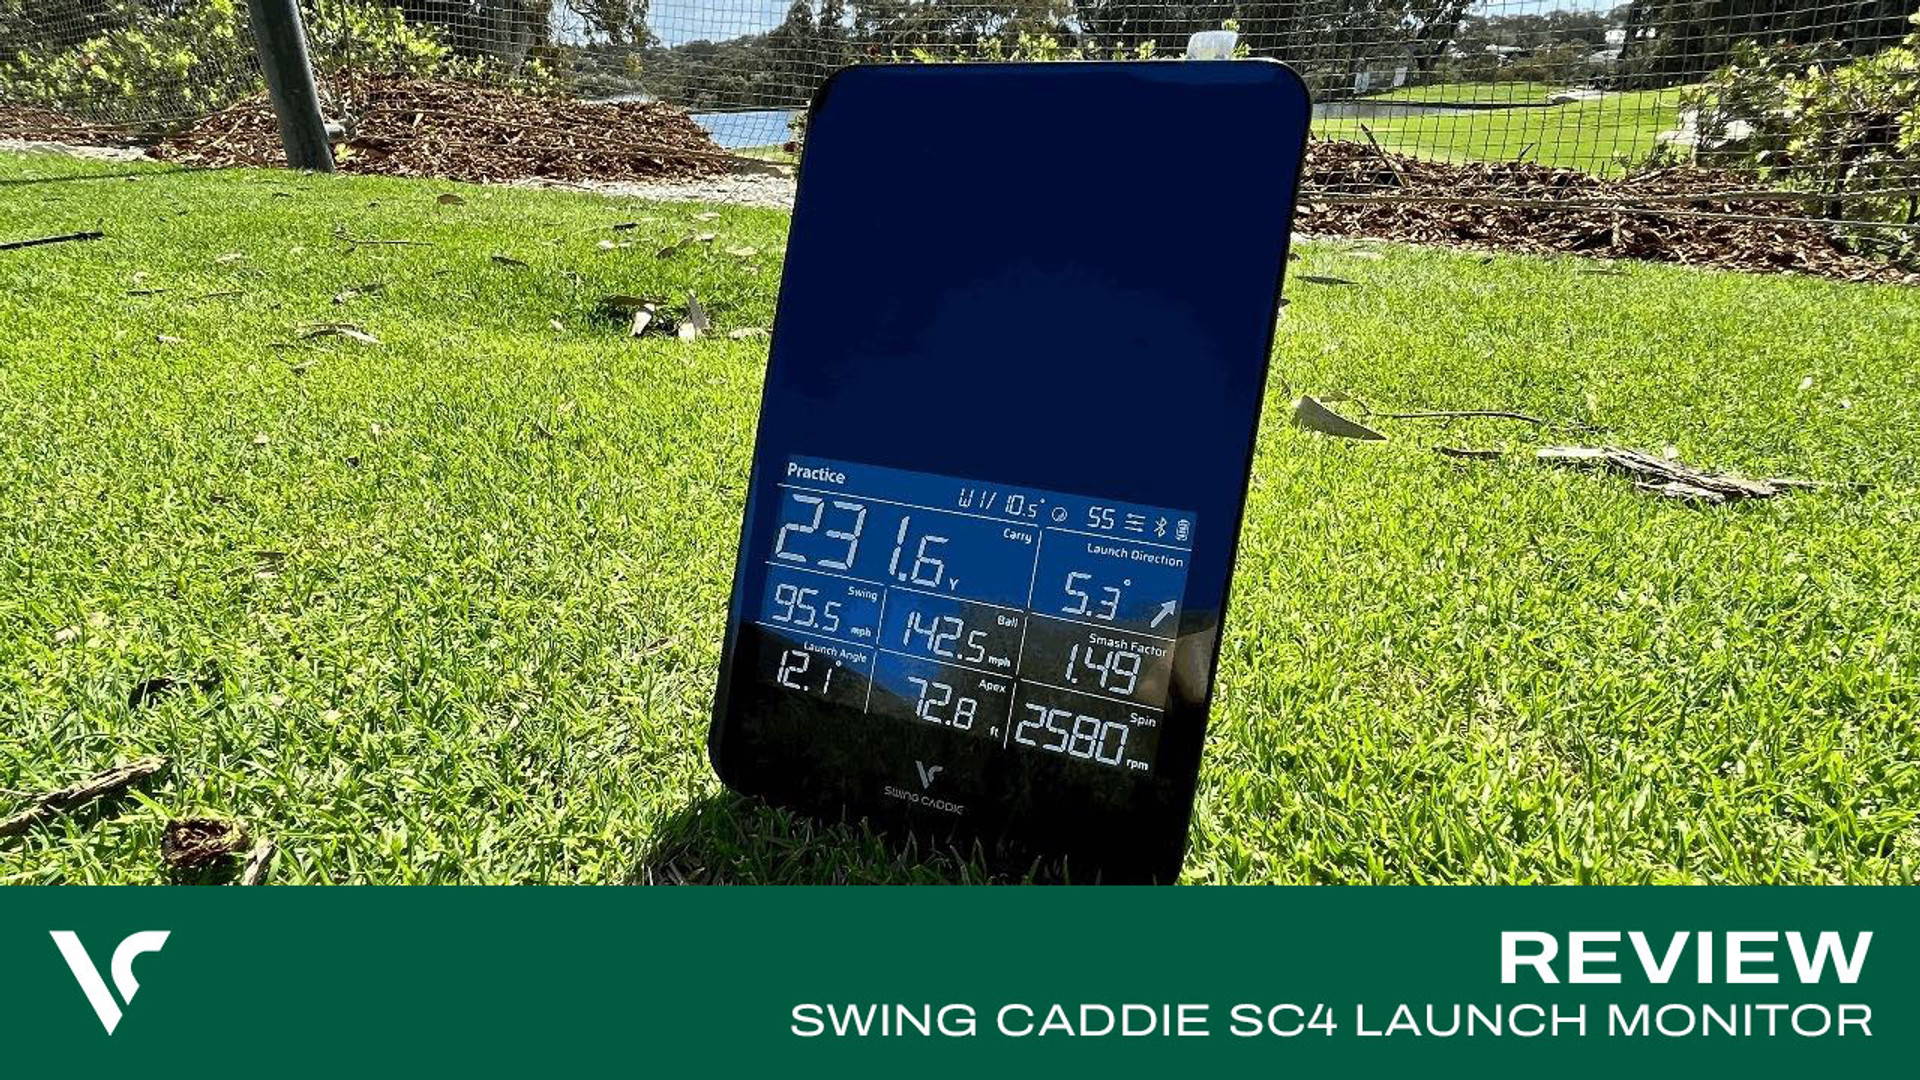 Swing Caddie SC4 Launch Monitor - Review